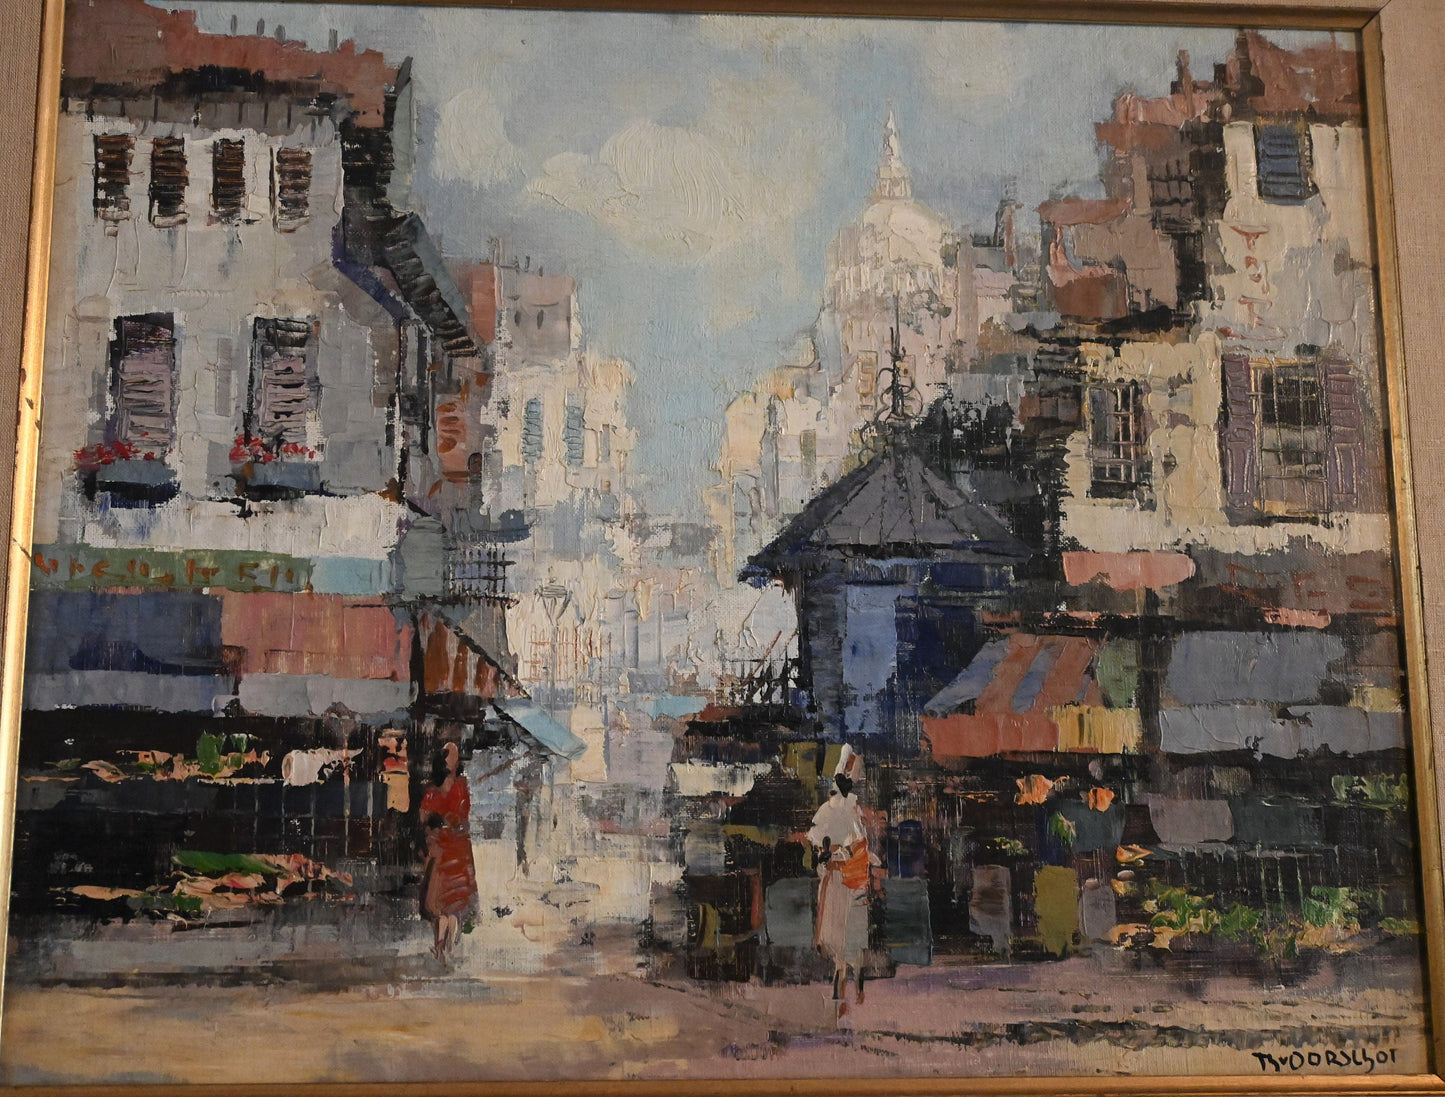 Theodore Van Oorschot (Dutch 1910-1989 ) Large Original Impressionist Oil -26.5" x 30.5"W- featured in Museums- high auction & galley prices